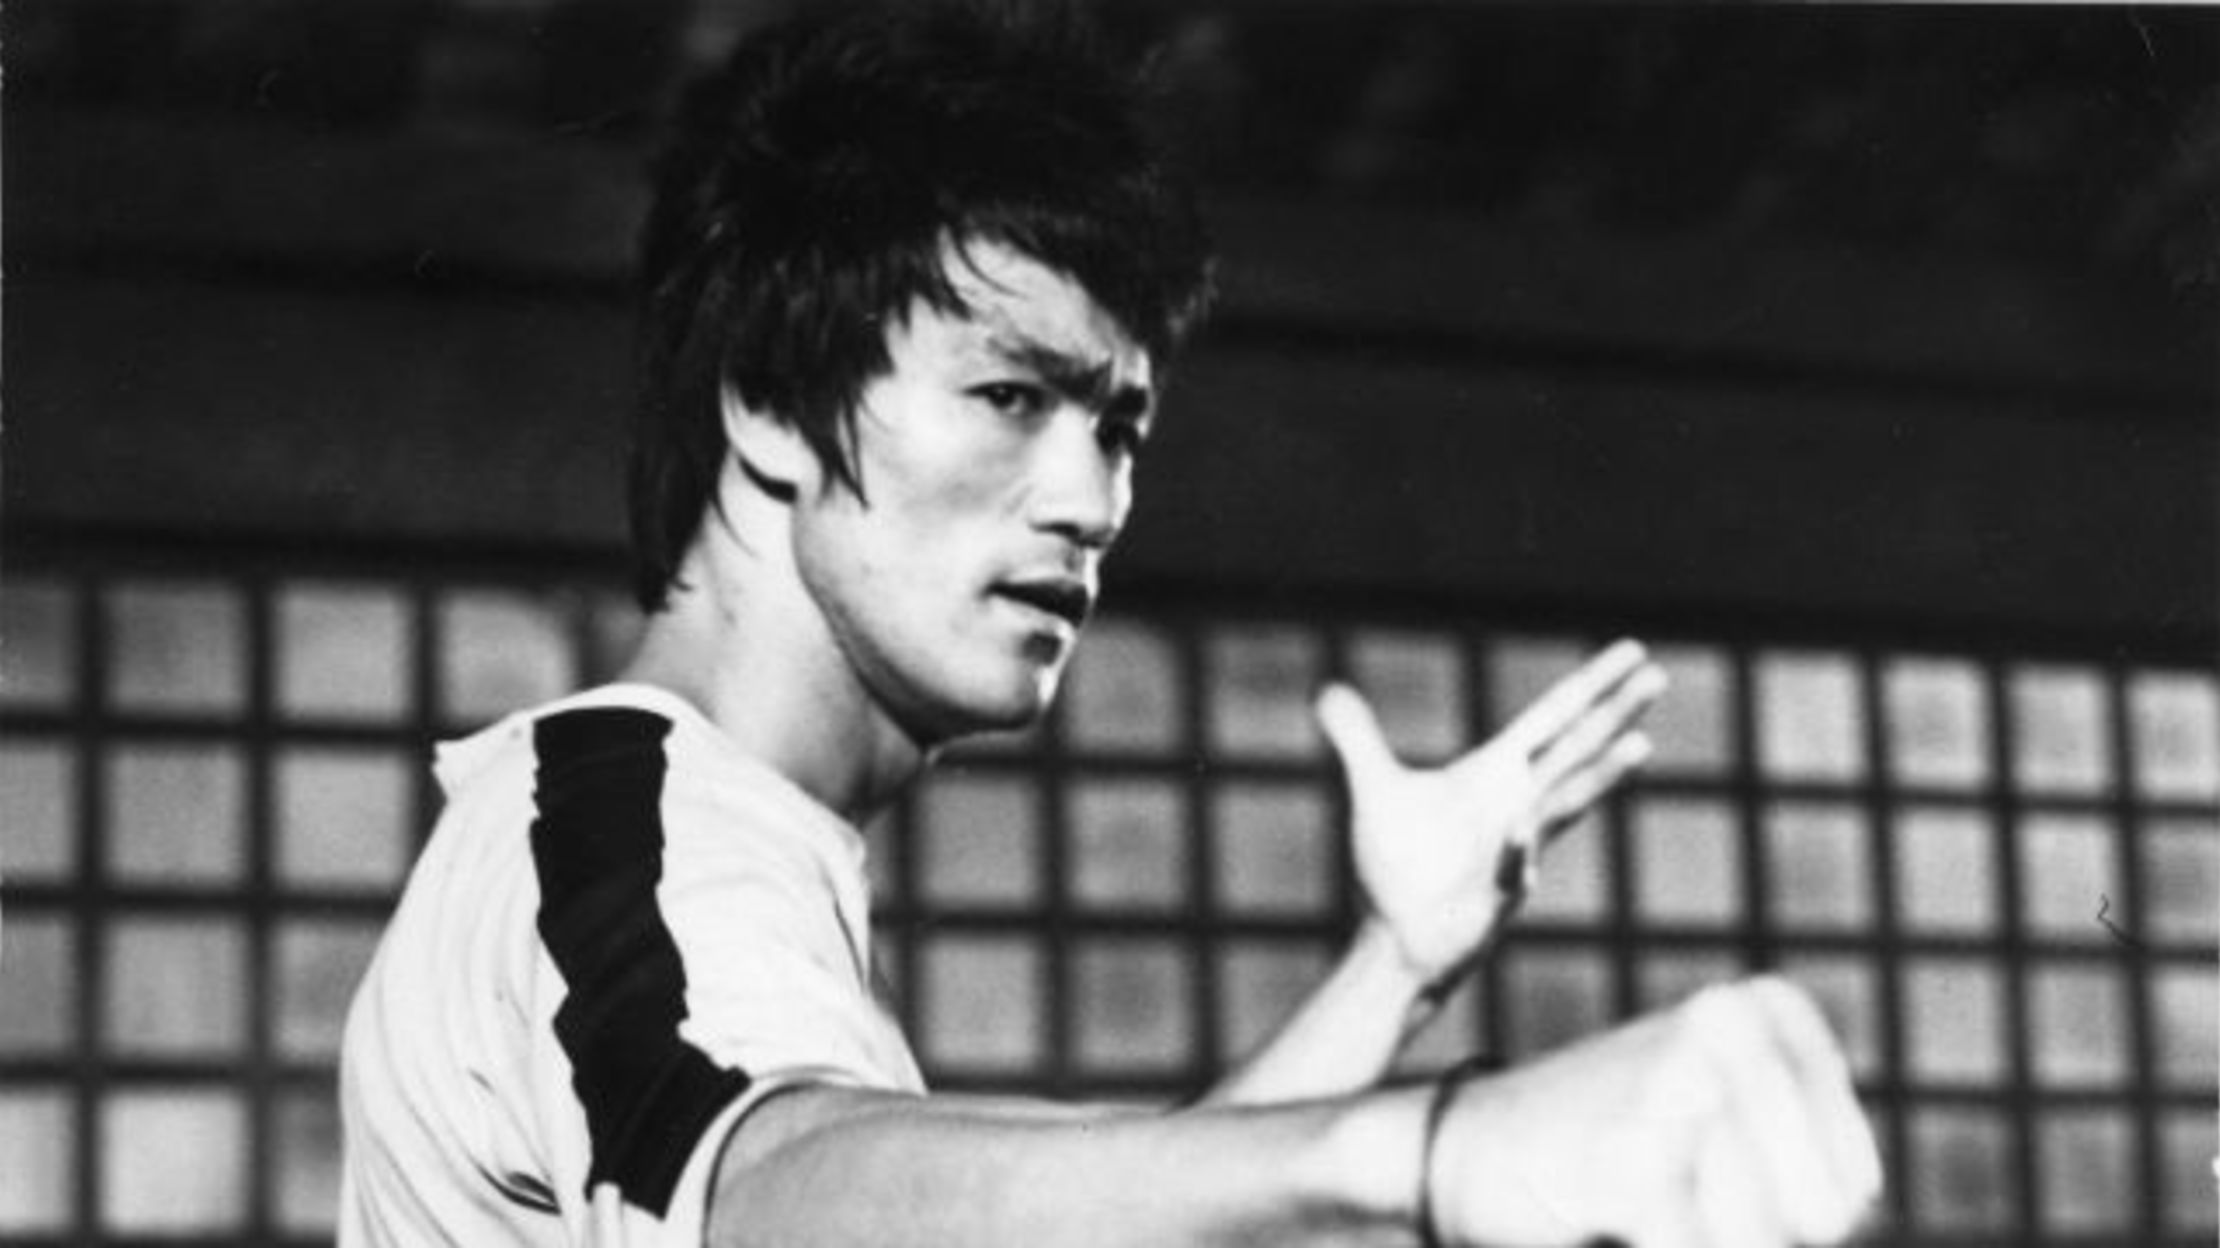 bruce lee come